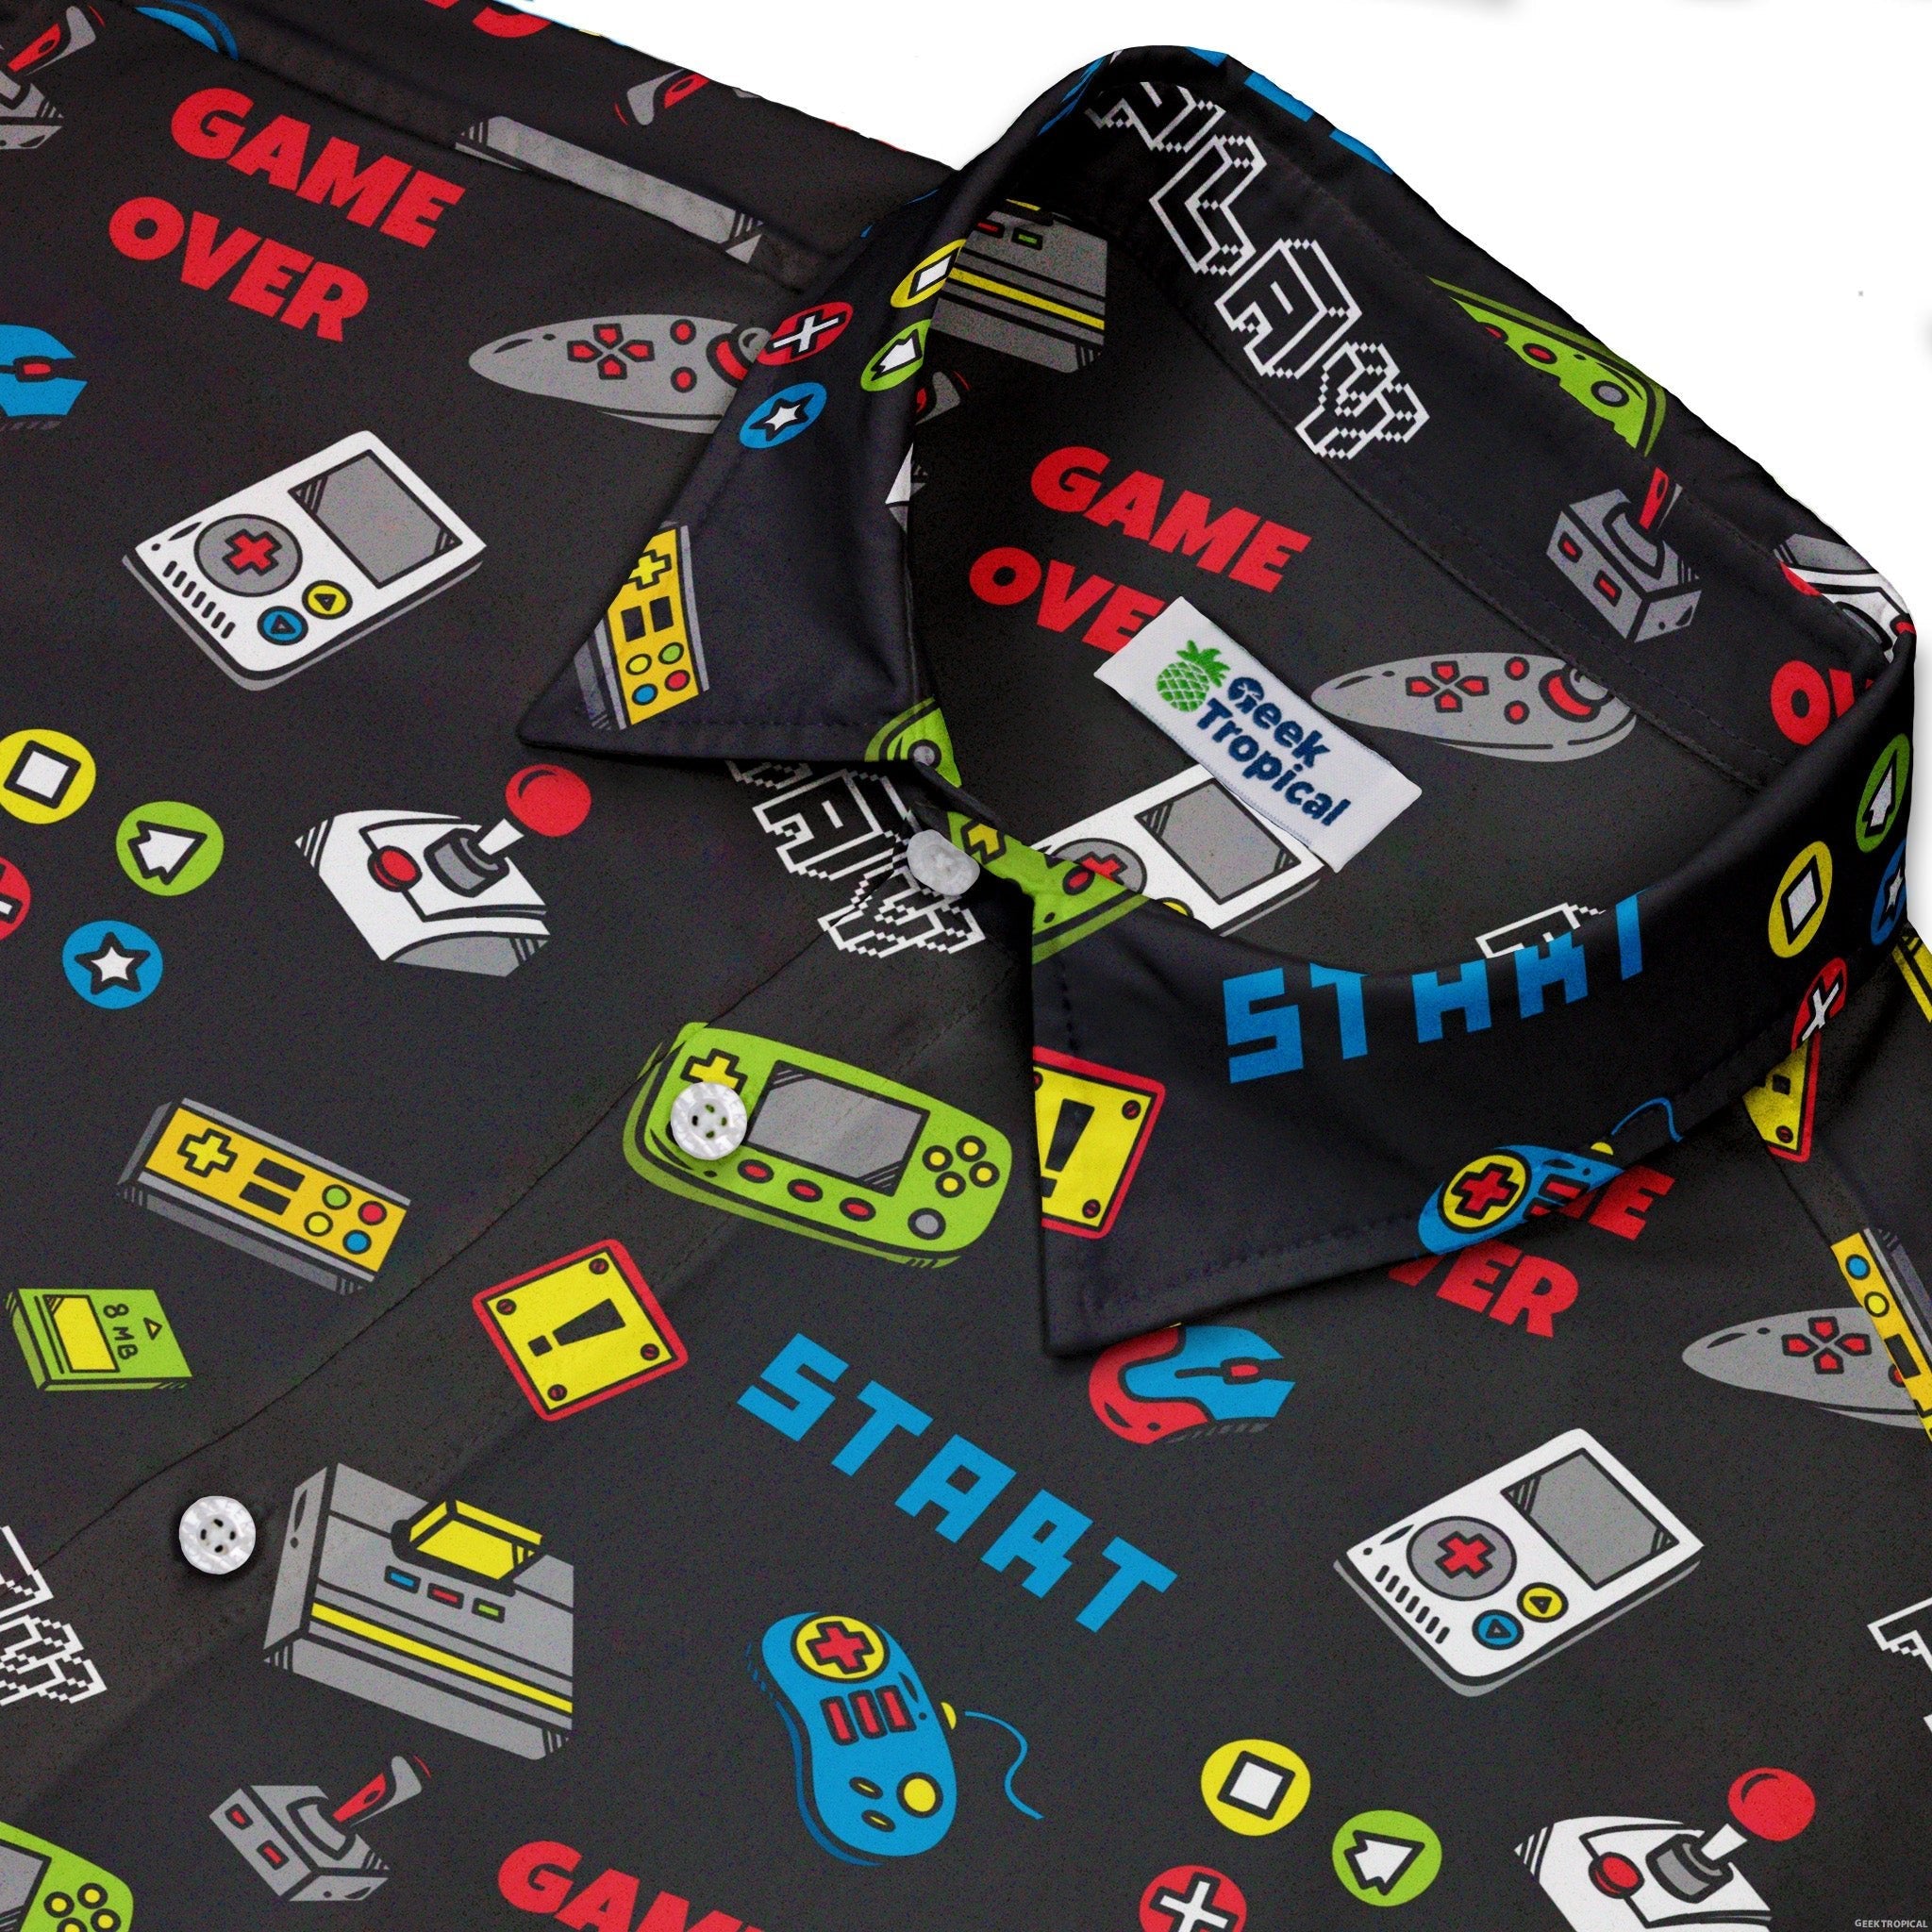 Video Gamer Black Video Game Button Up Shirt - adult sizing - video game arcade print -